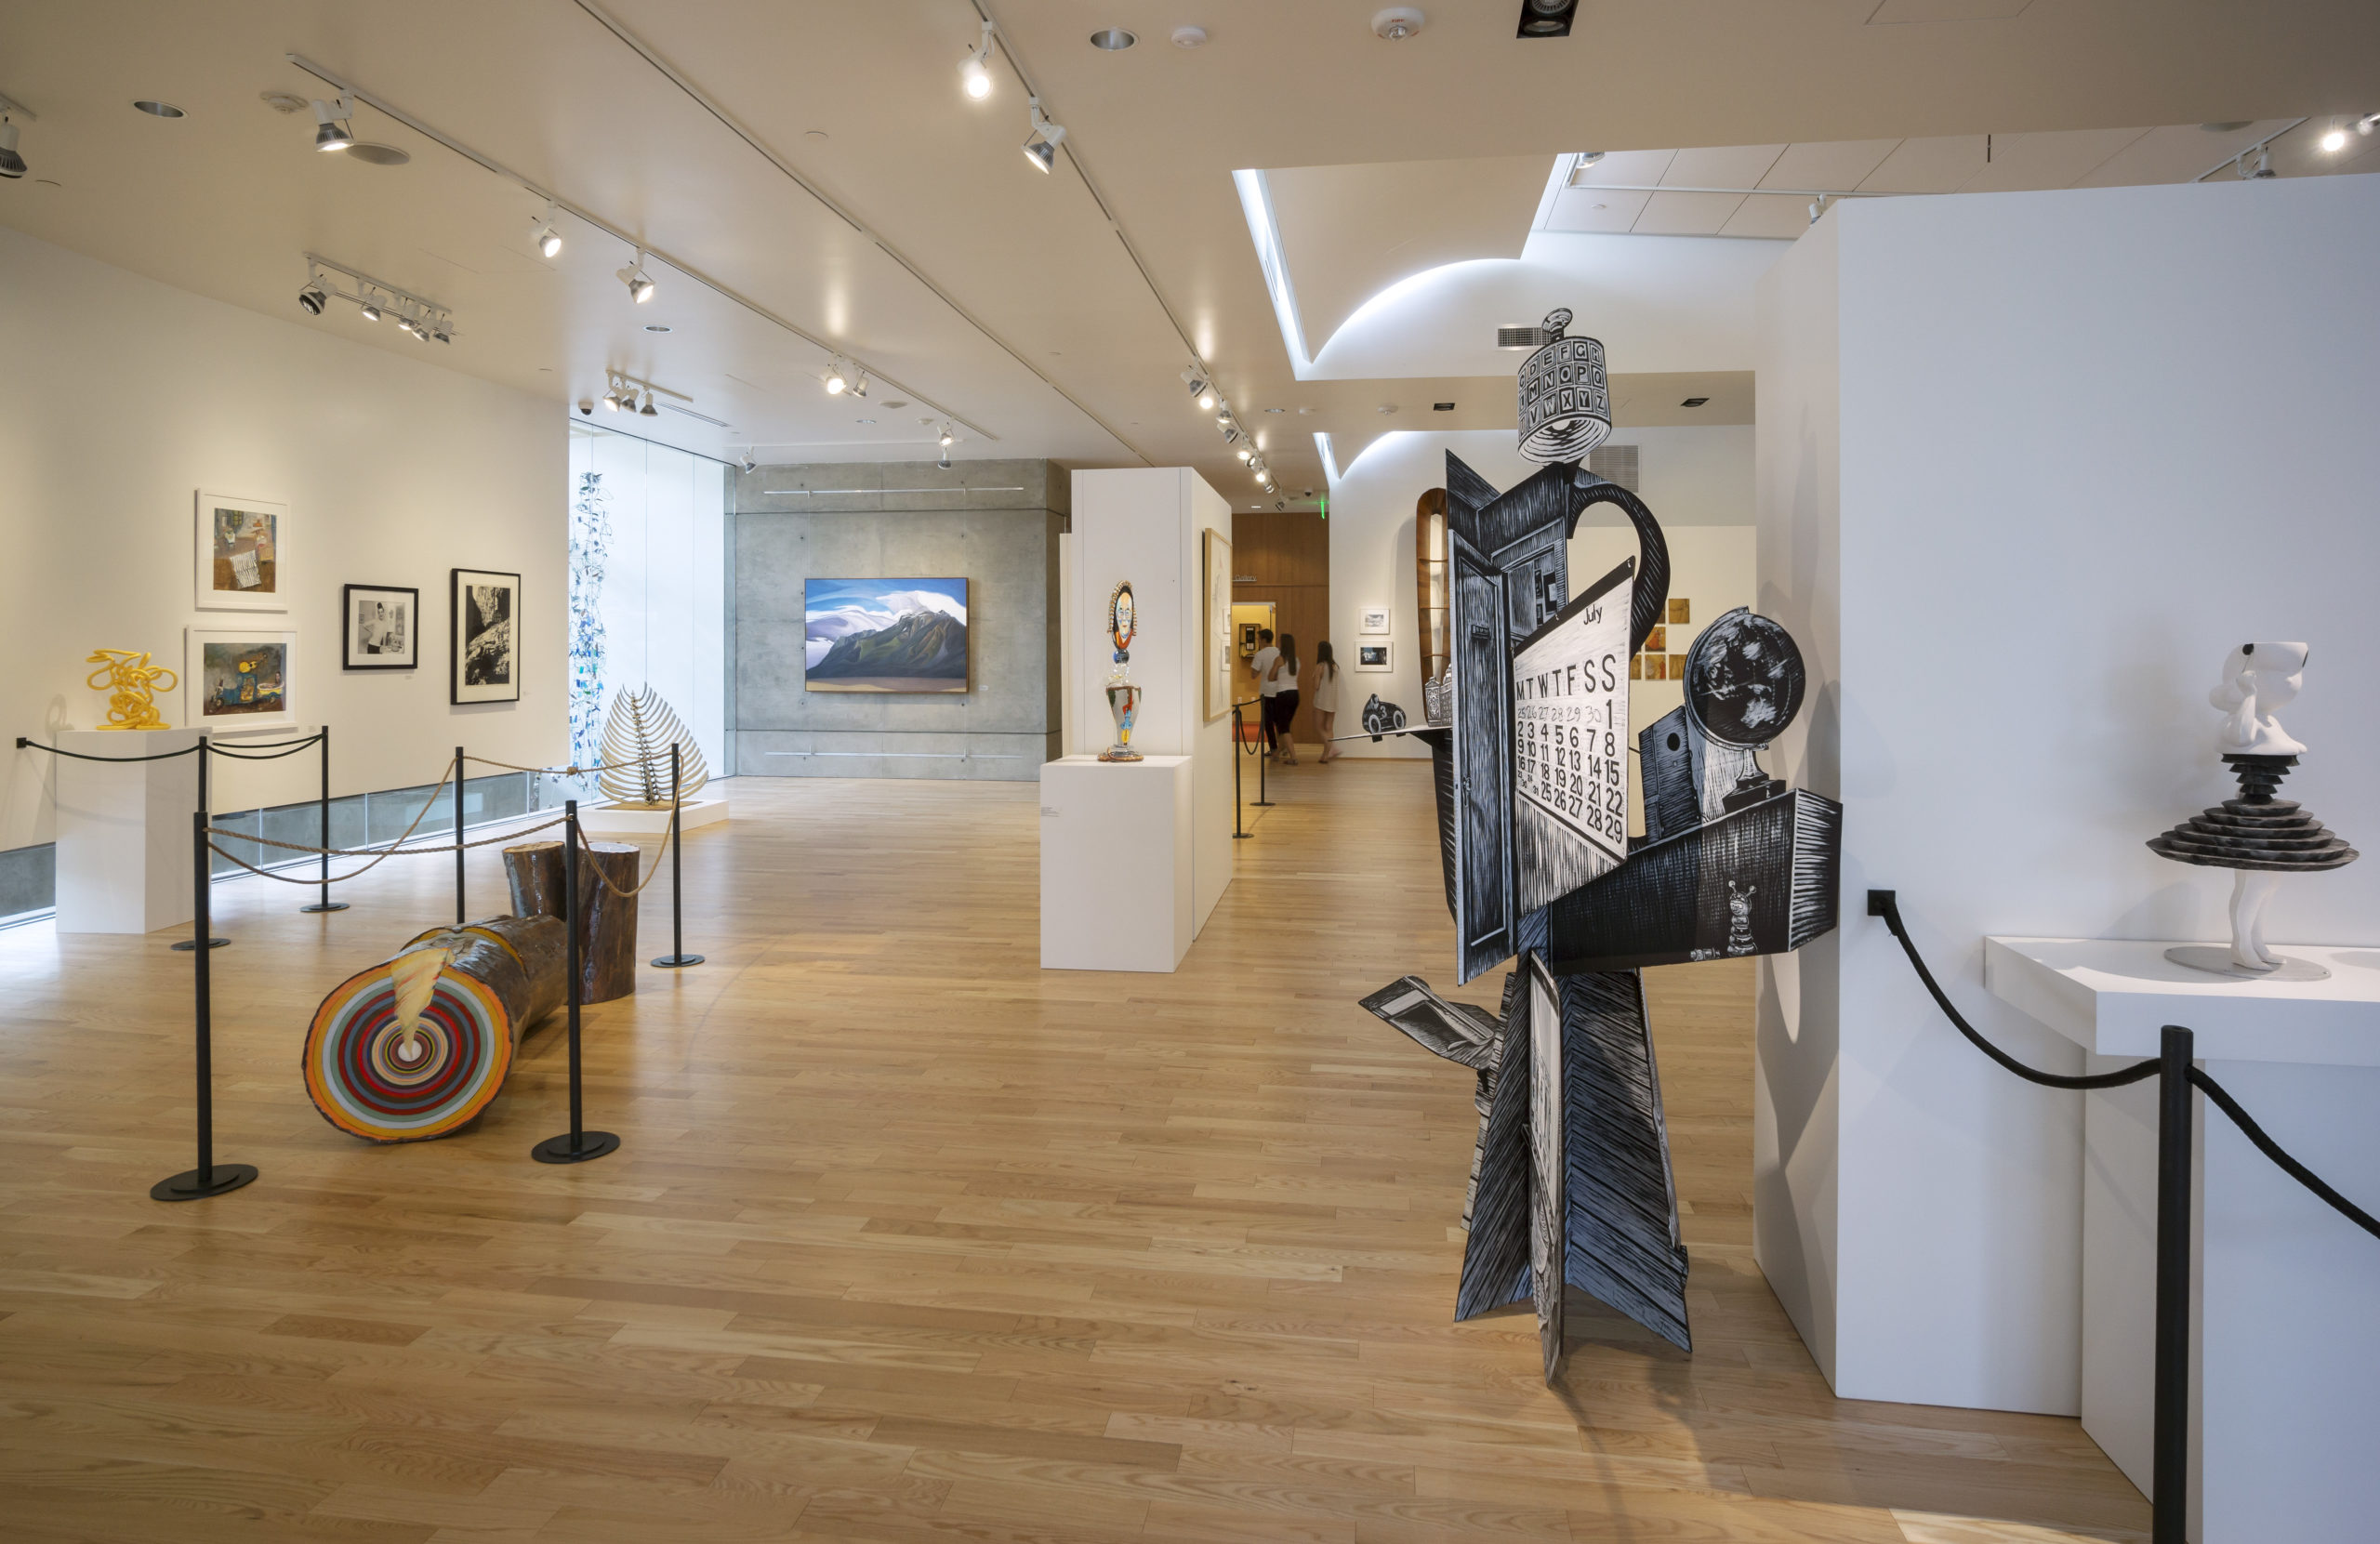 A peek into BIMA's inaugural exhibition, First Light, in June 2013. Photo by Art Grice.